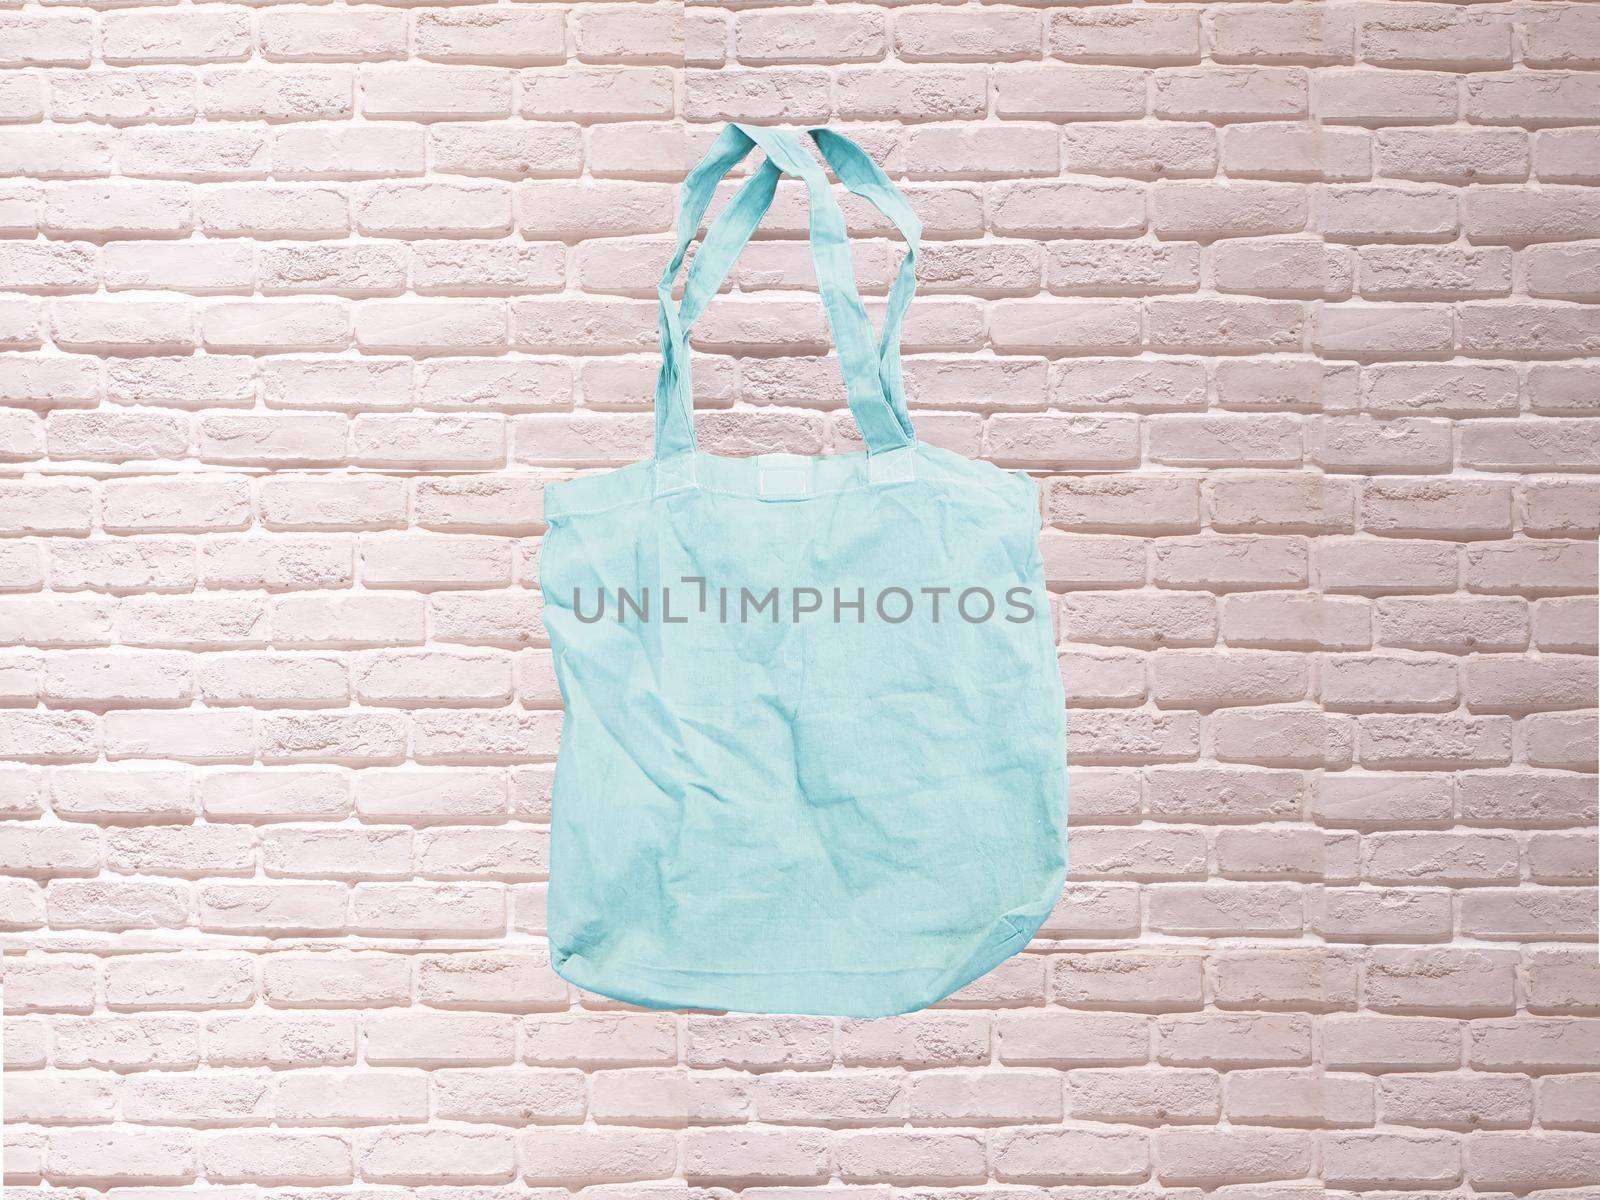 Mock up Tote bag eco hipster white cotton fabric Shopping bag in blue . white brick eall rustic background by Petrichor